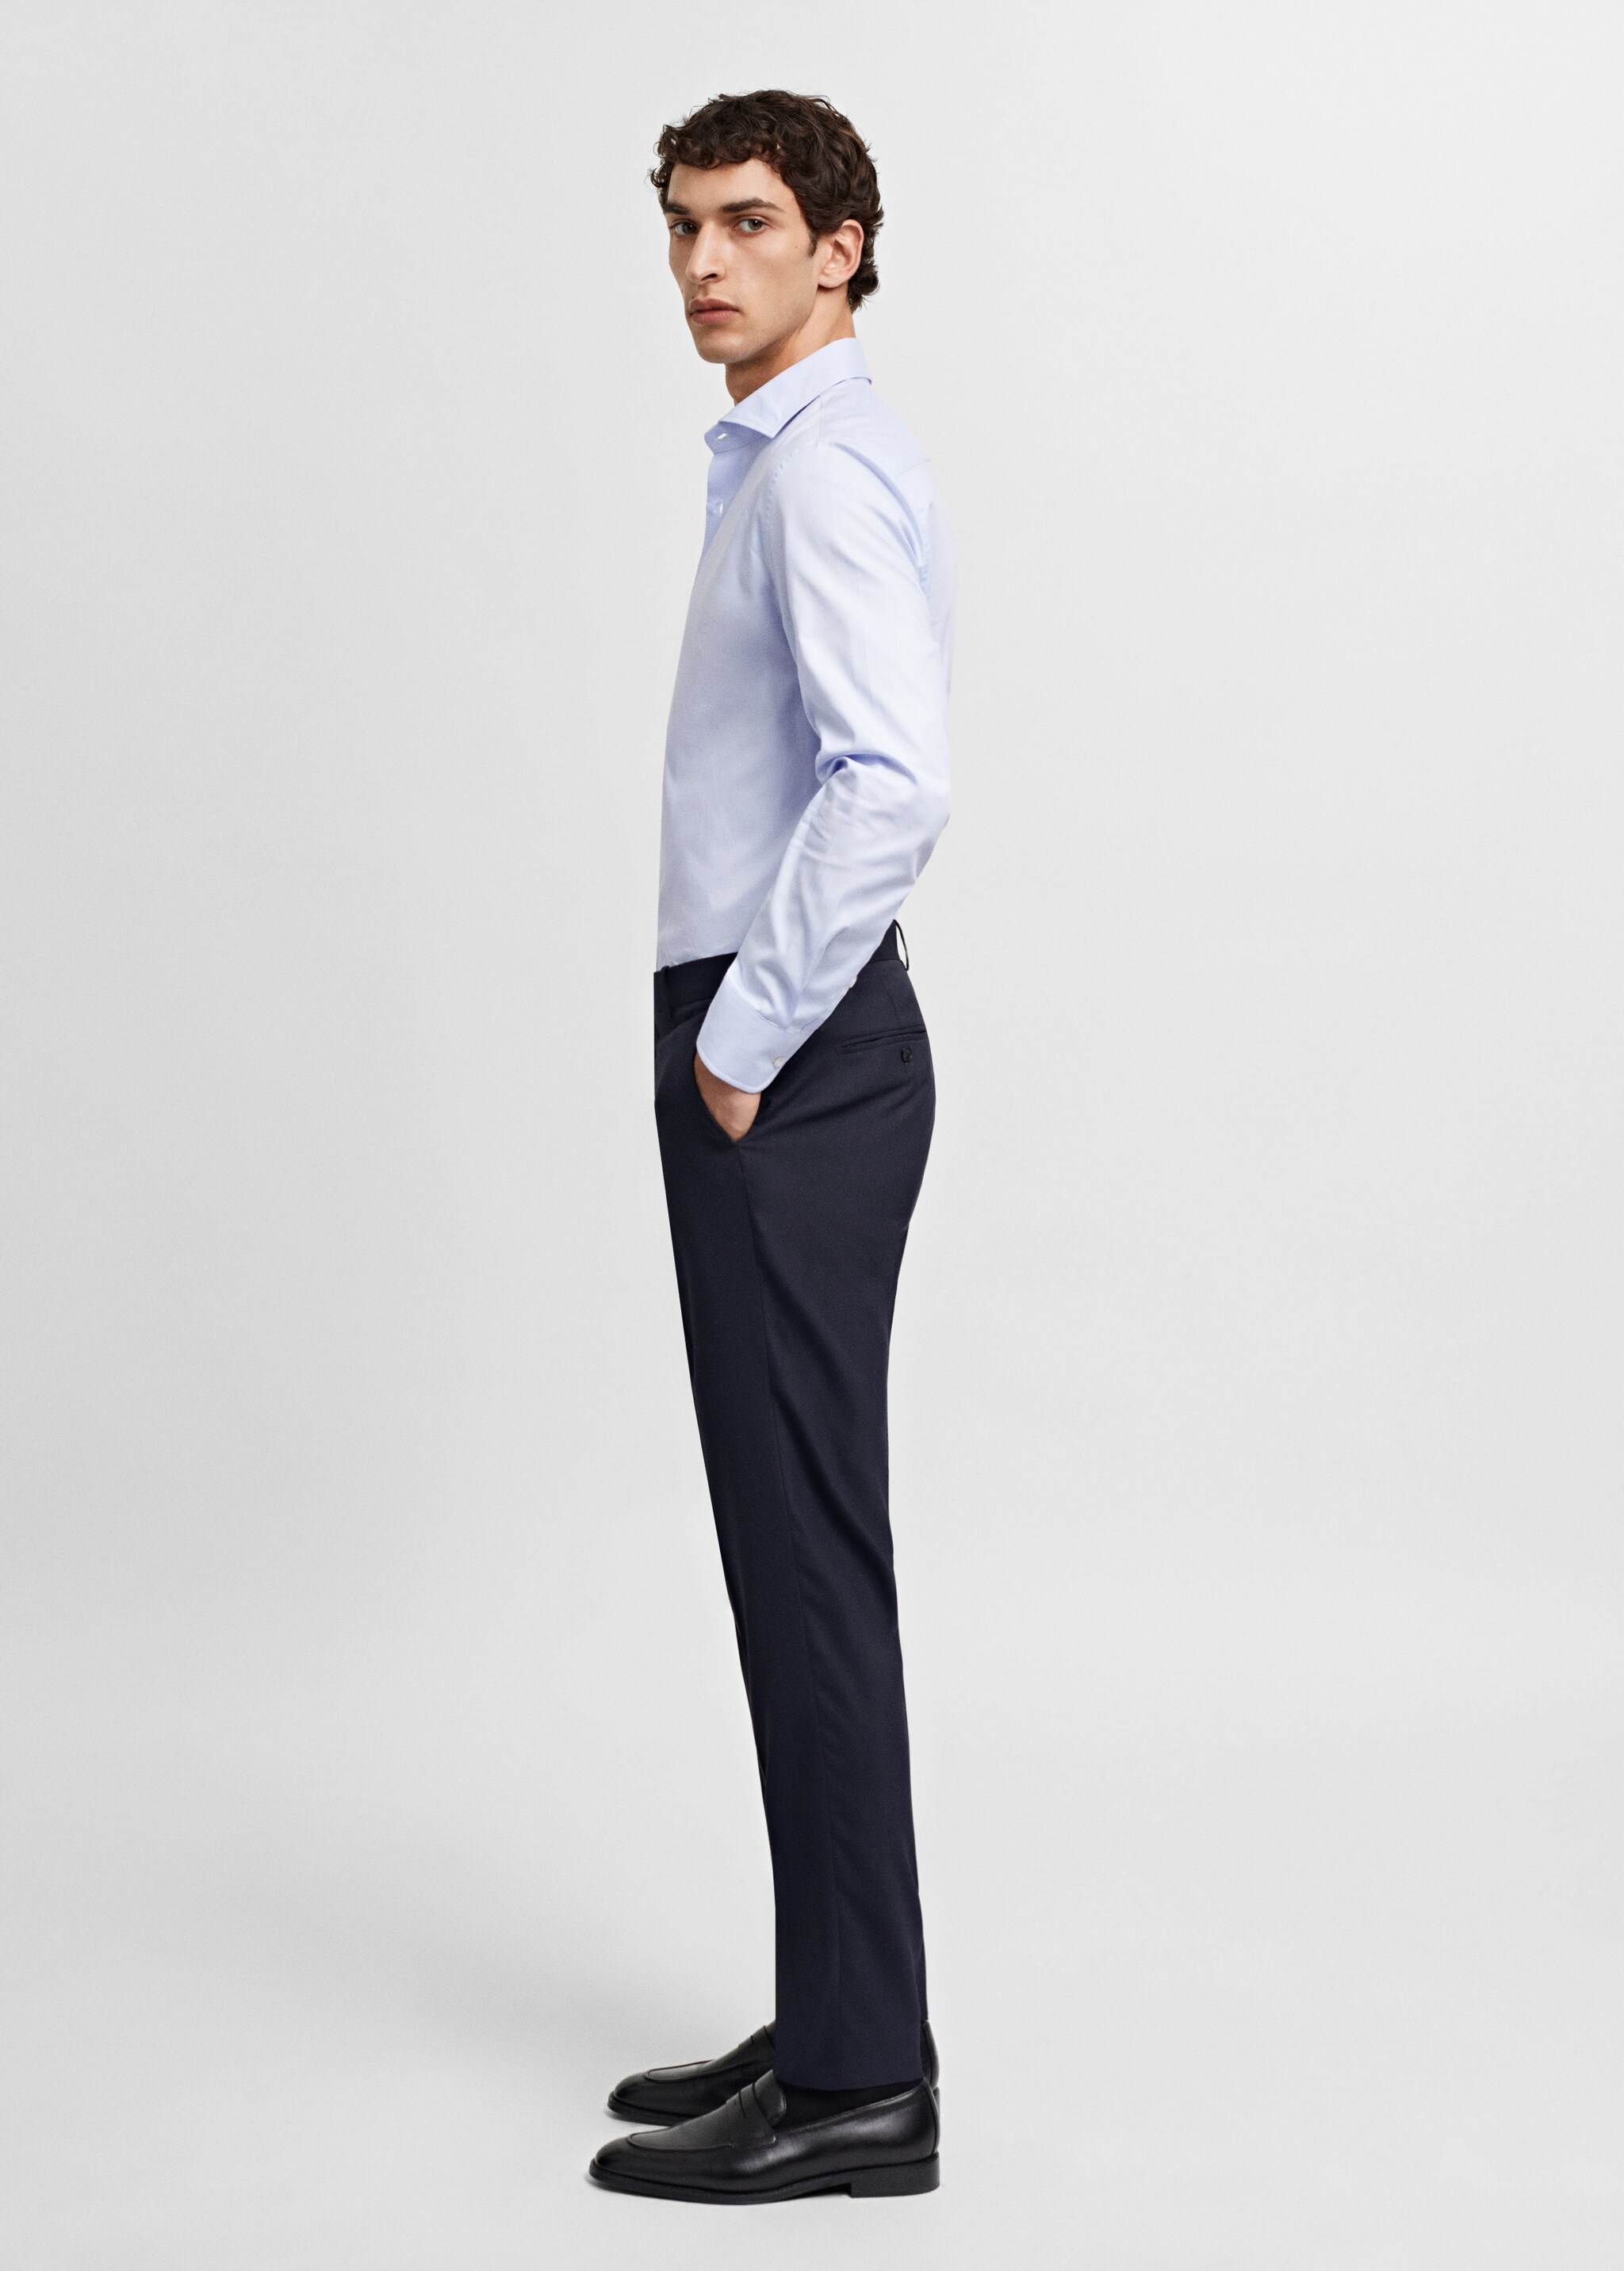 Slim fit structured suit shirt - Details of the article 2